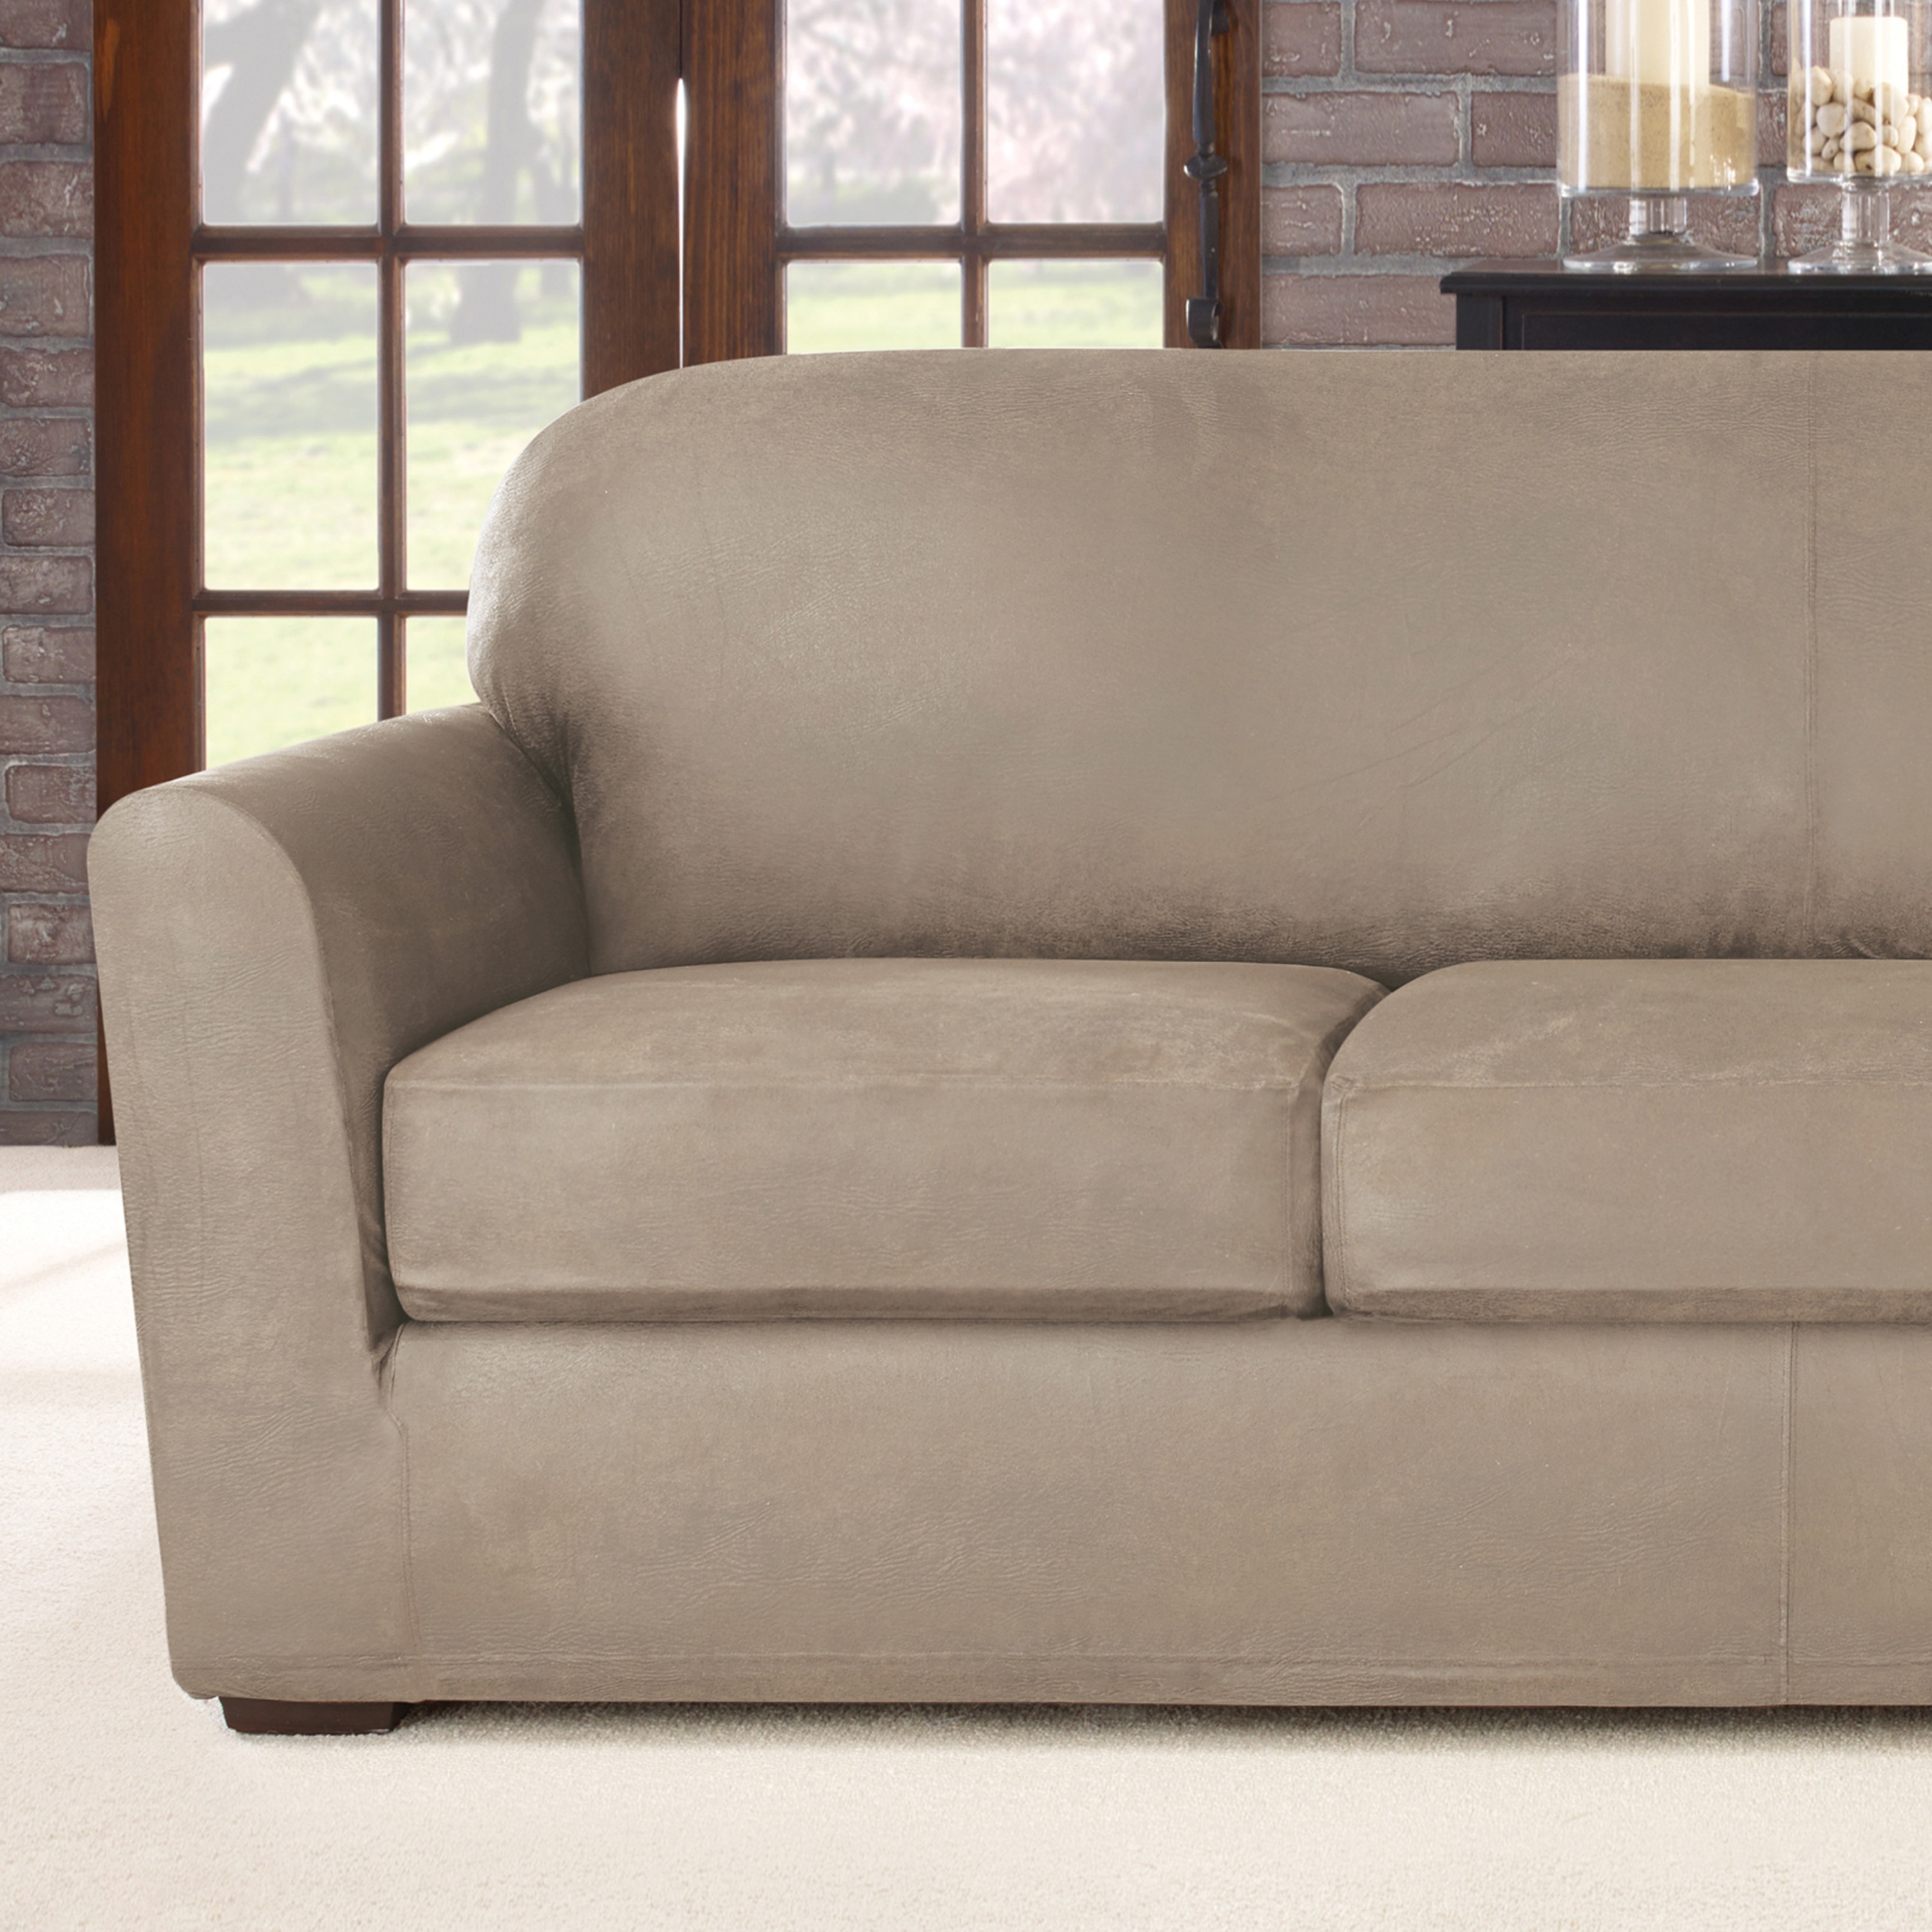 SureFit Ultimate Stretch Leather 4 Piece Sofa Slipcover - Light Pebbled Gray